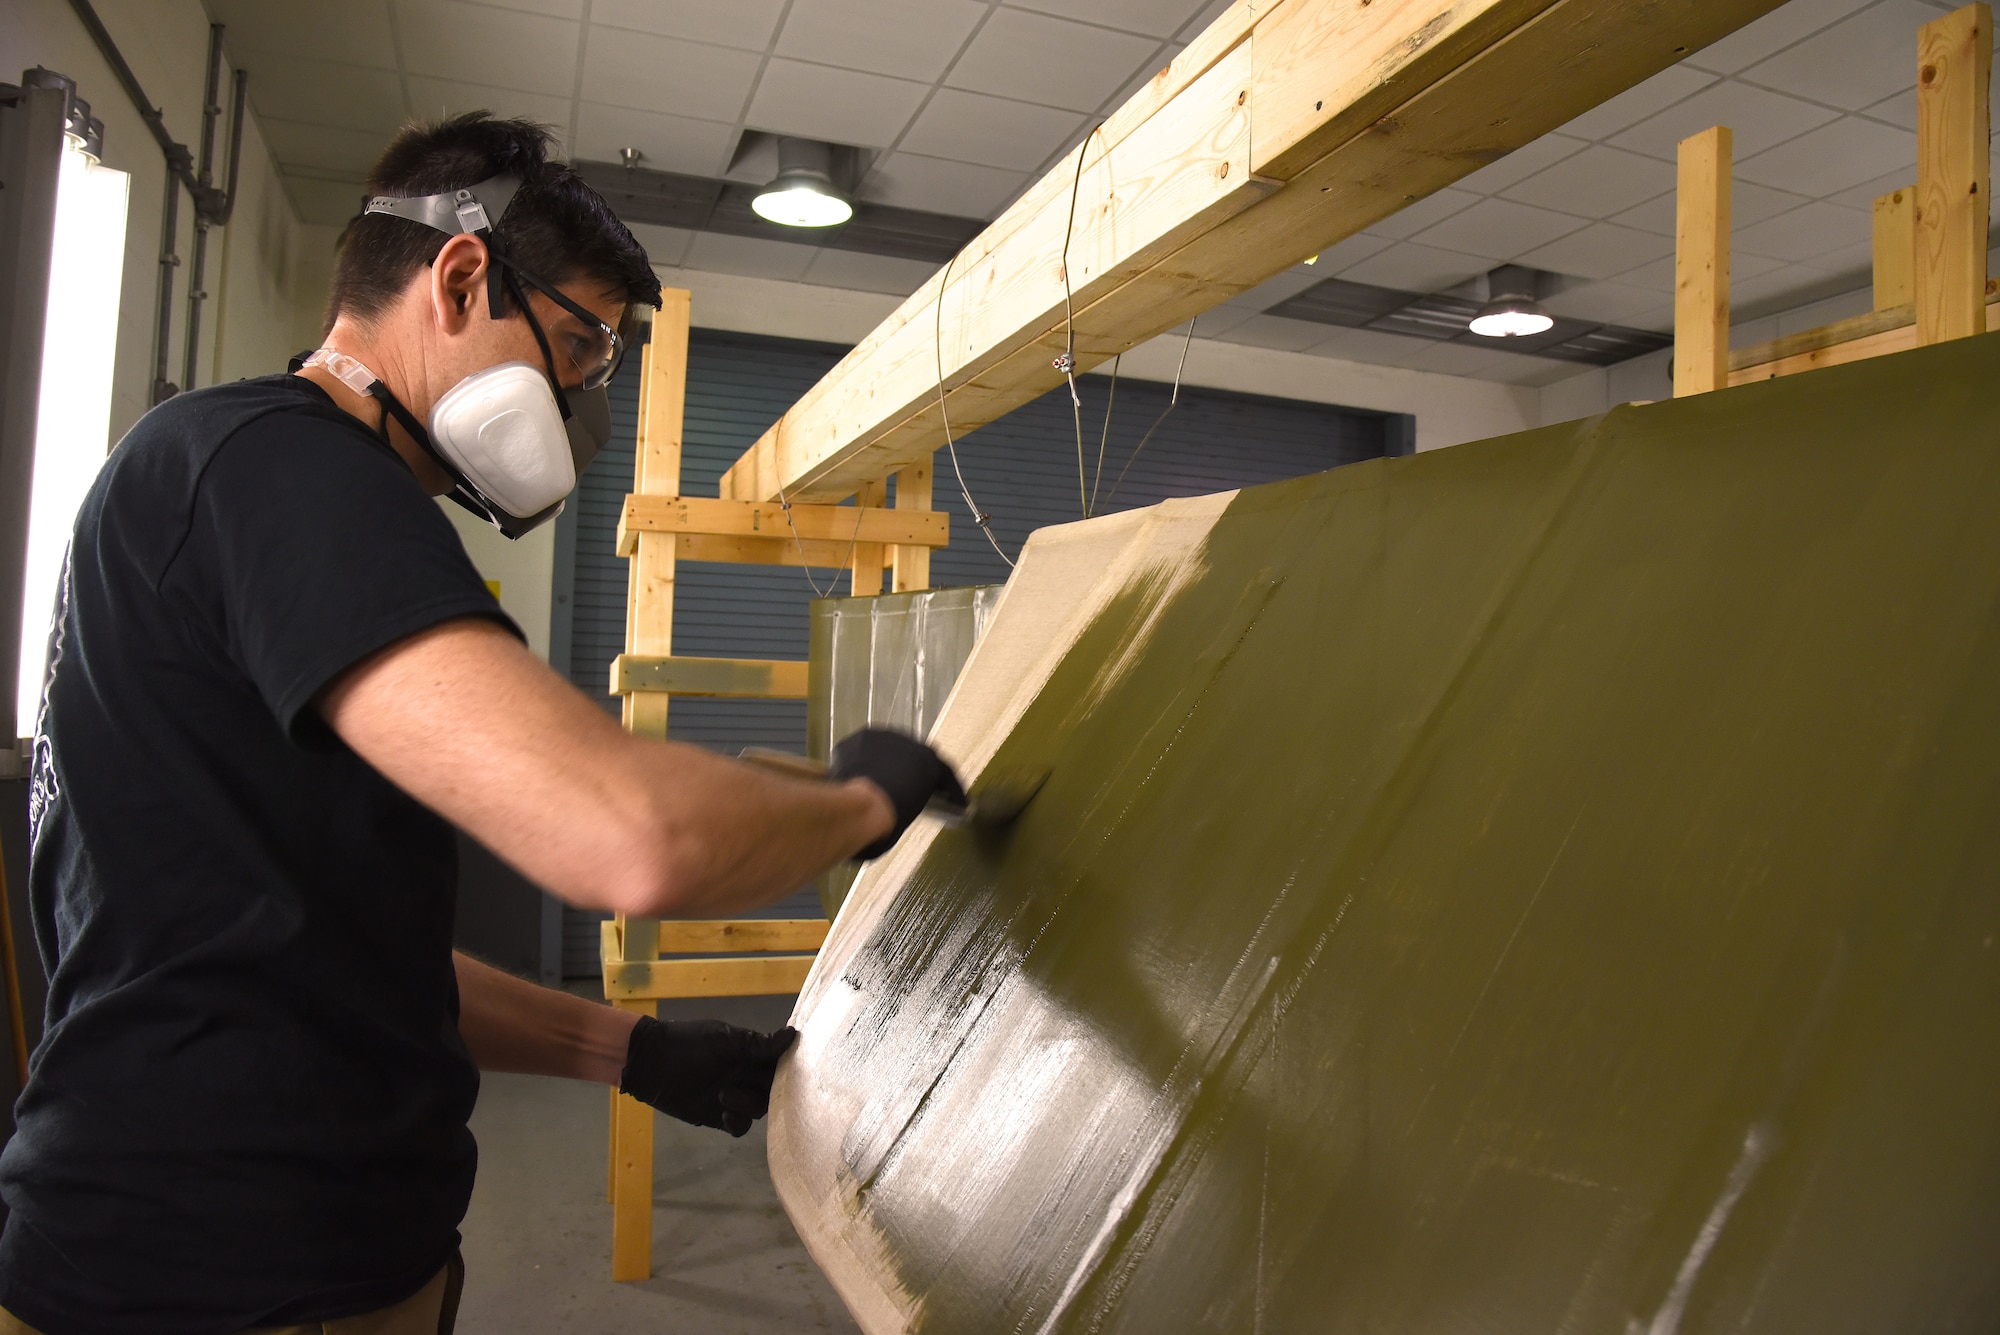 DAYTON, Ohio -- Museum restoration specialist Casey Simmons applies green dope to the Avro 504K control surfaces. This aircraft was originally built in 1966 by the Royal Canadian Air Force's Aircraft Maintenance & Development Unit. Preserving the Air Force's proud legacy, the Restoration Division restores aircraft and aerospace vehicles to historically accurate and visually striking levels. (U.S. Air Force photo by Ken LaRock)